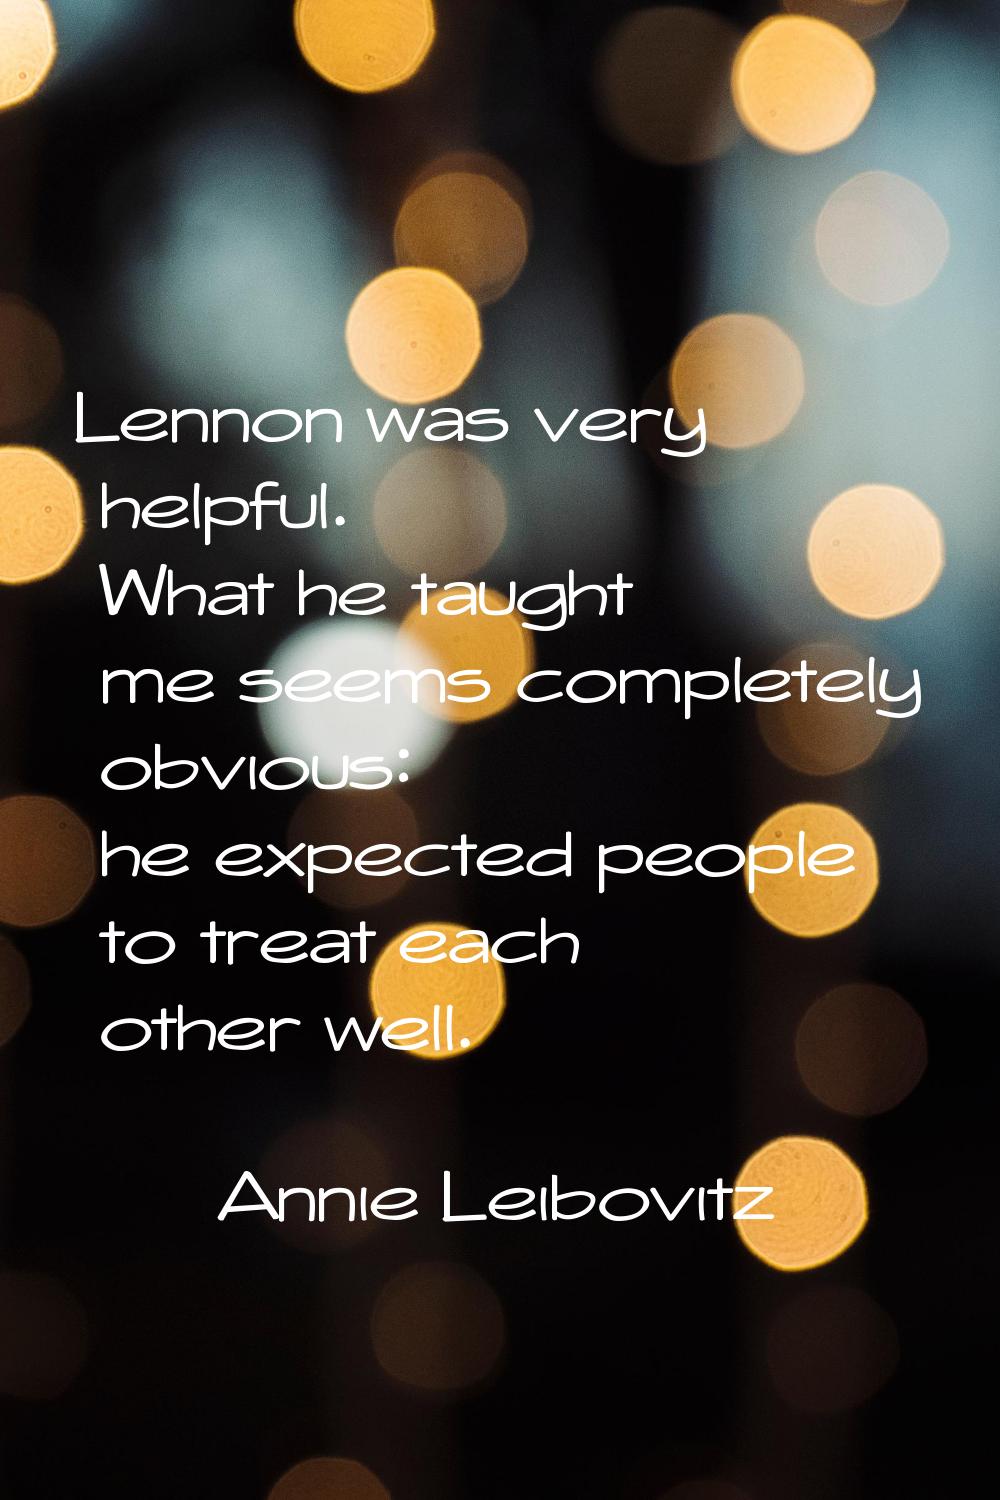 Lennon was very helpful. What he taught me seems completely obvious: he expected people to treat ea